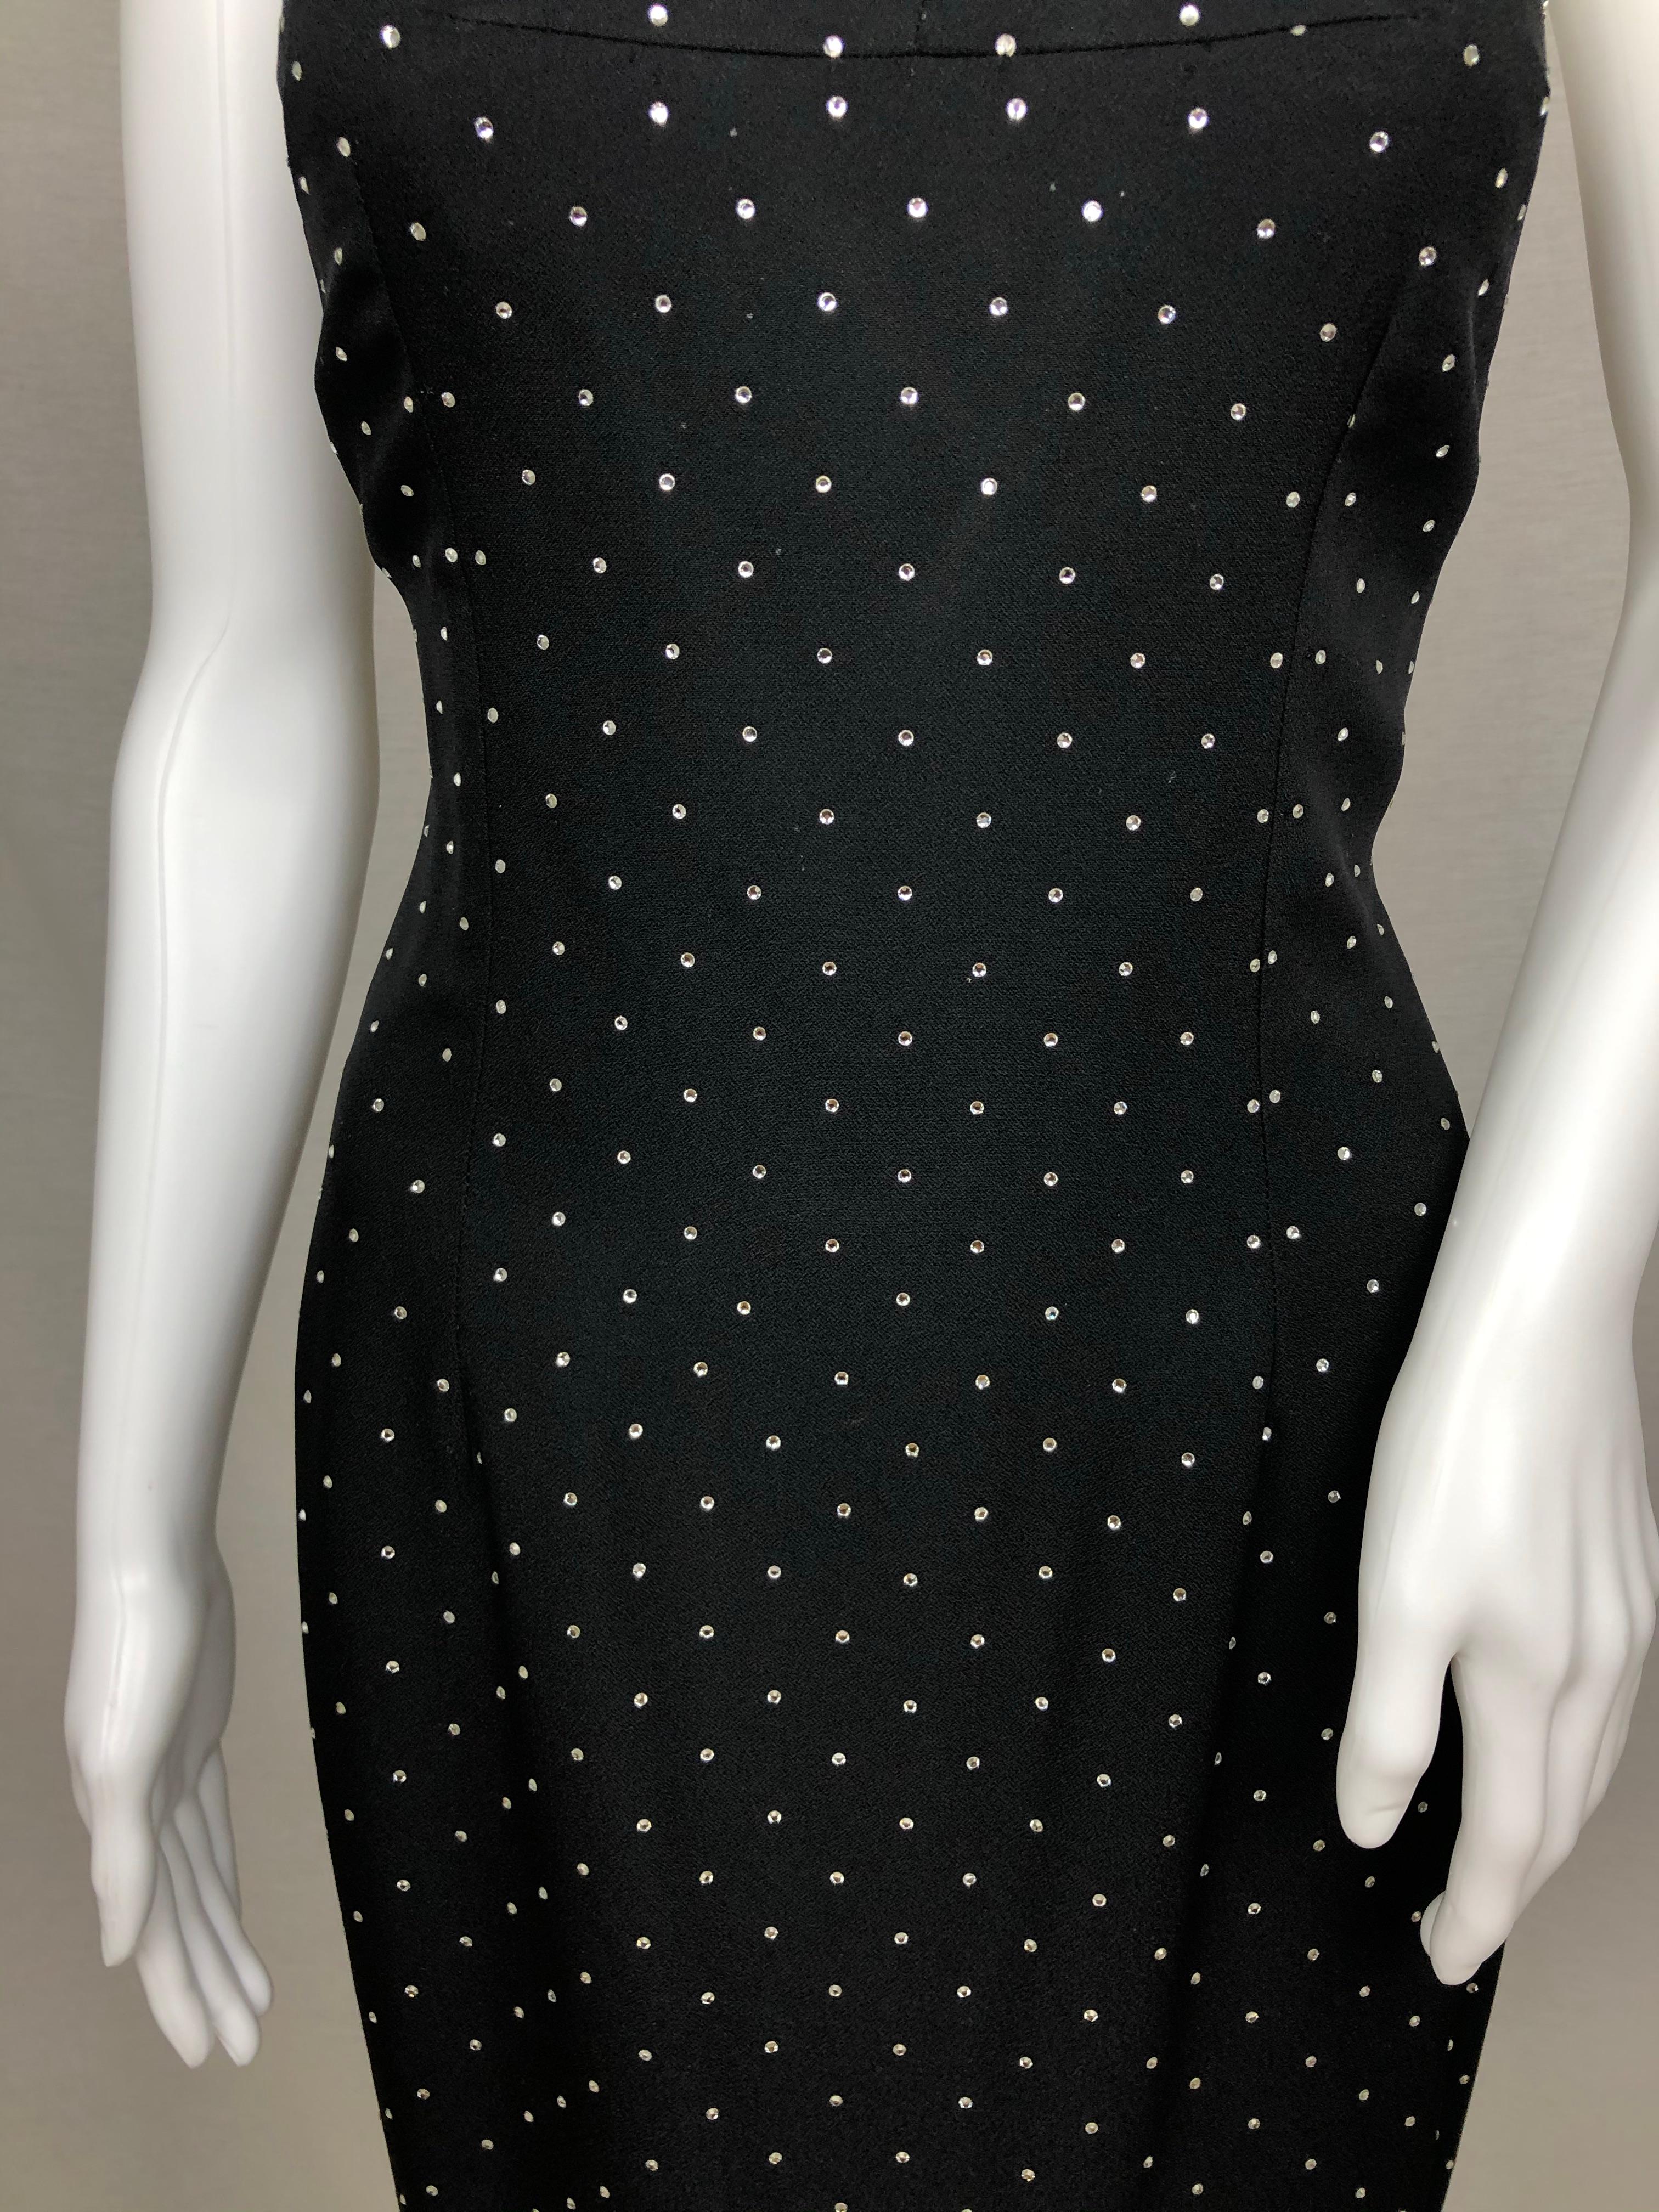 Dolce & Gabbana Spring 1995 dress In Excellent Condition In Brooklyn, NY